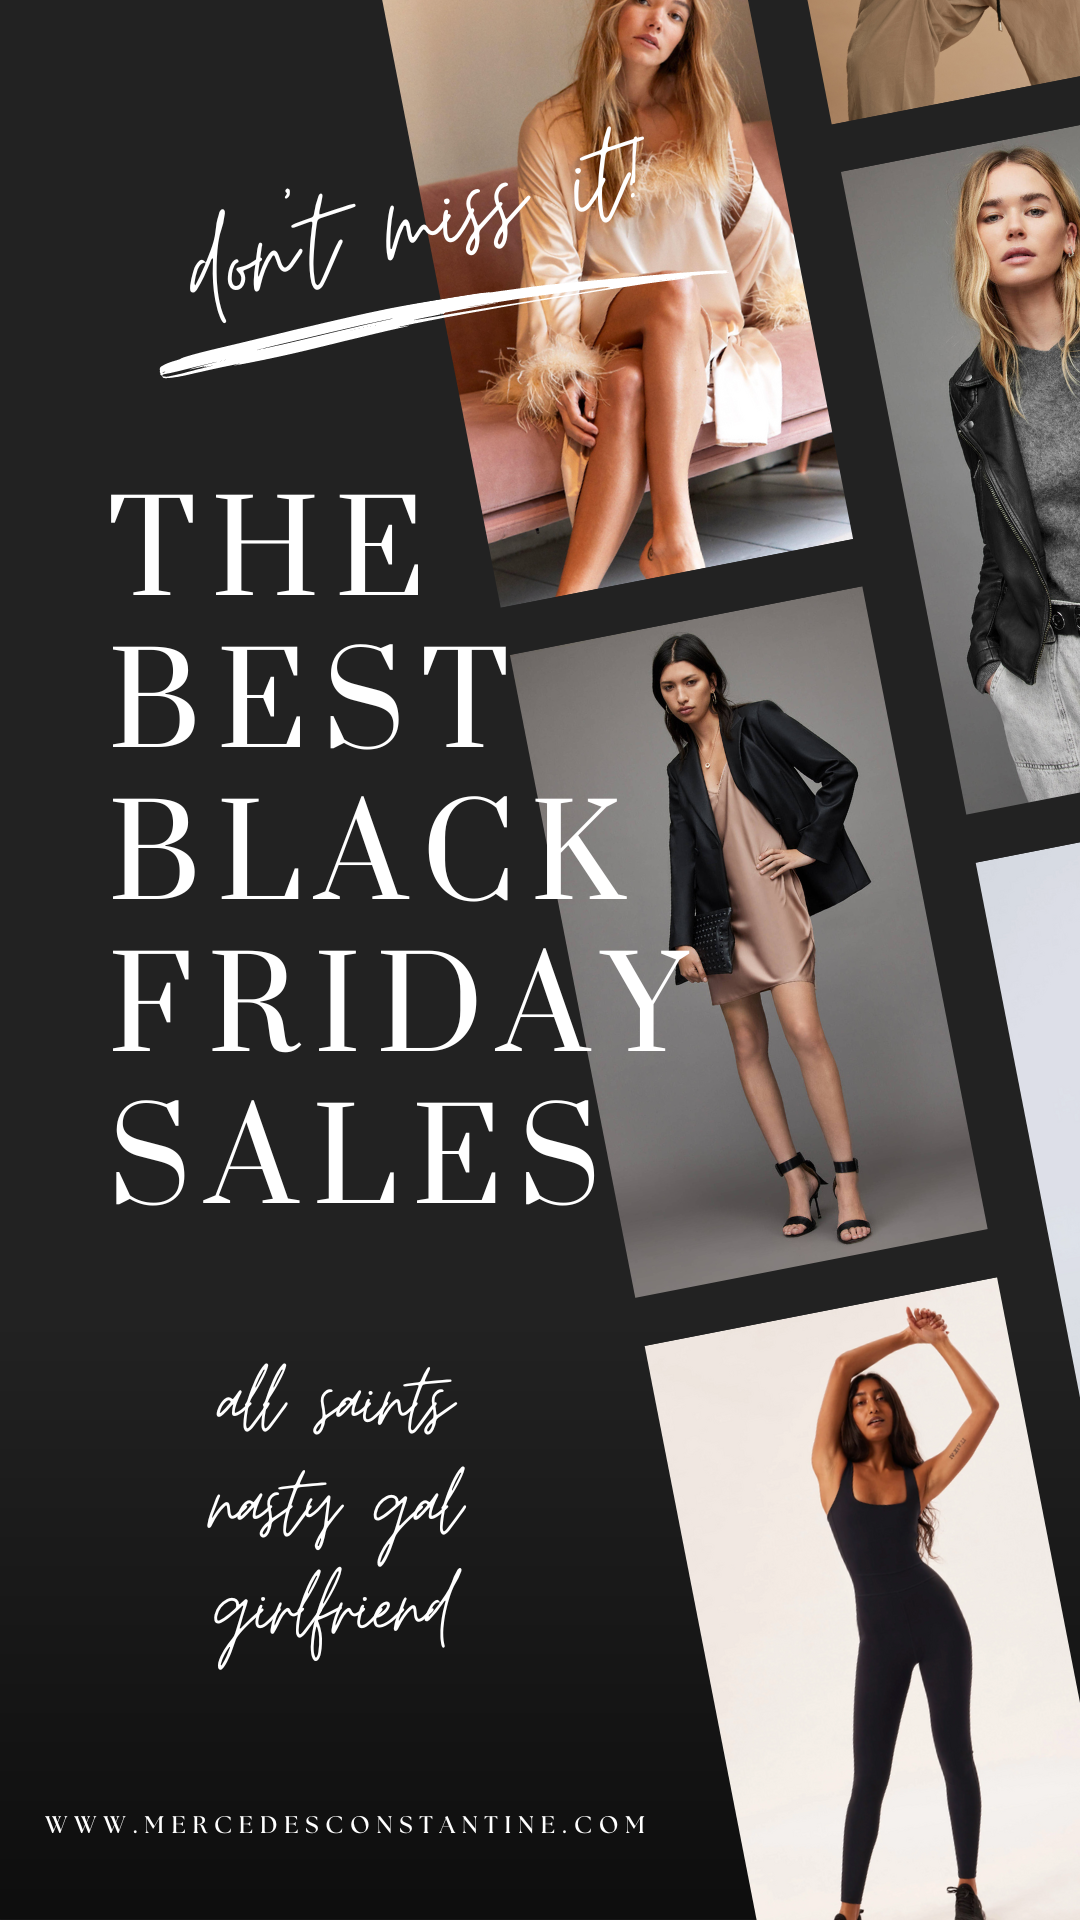 Shop the best Black Friday sales now with these discount codes